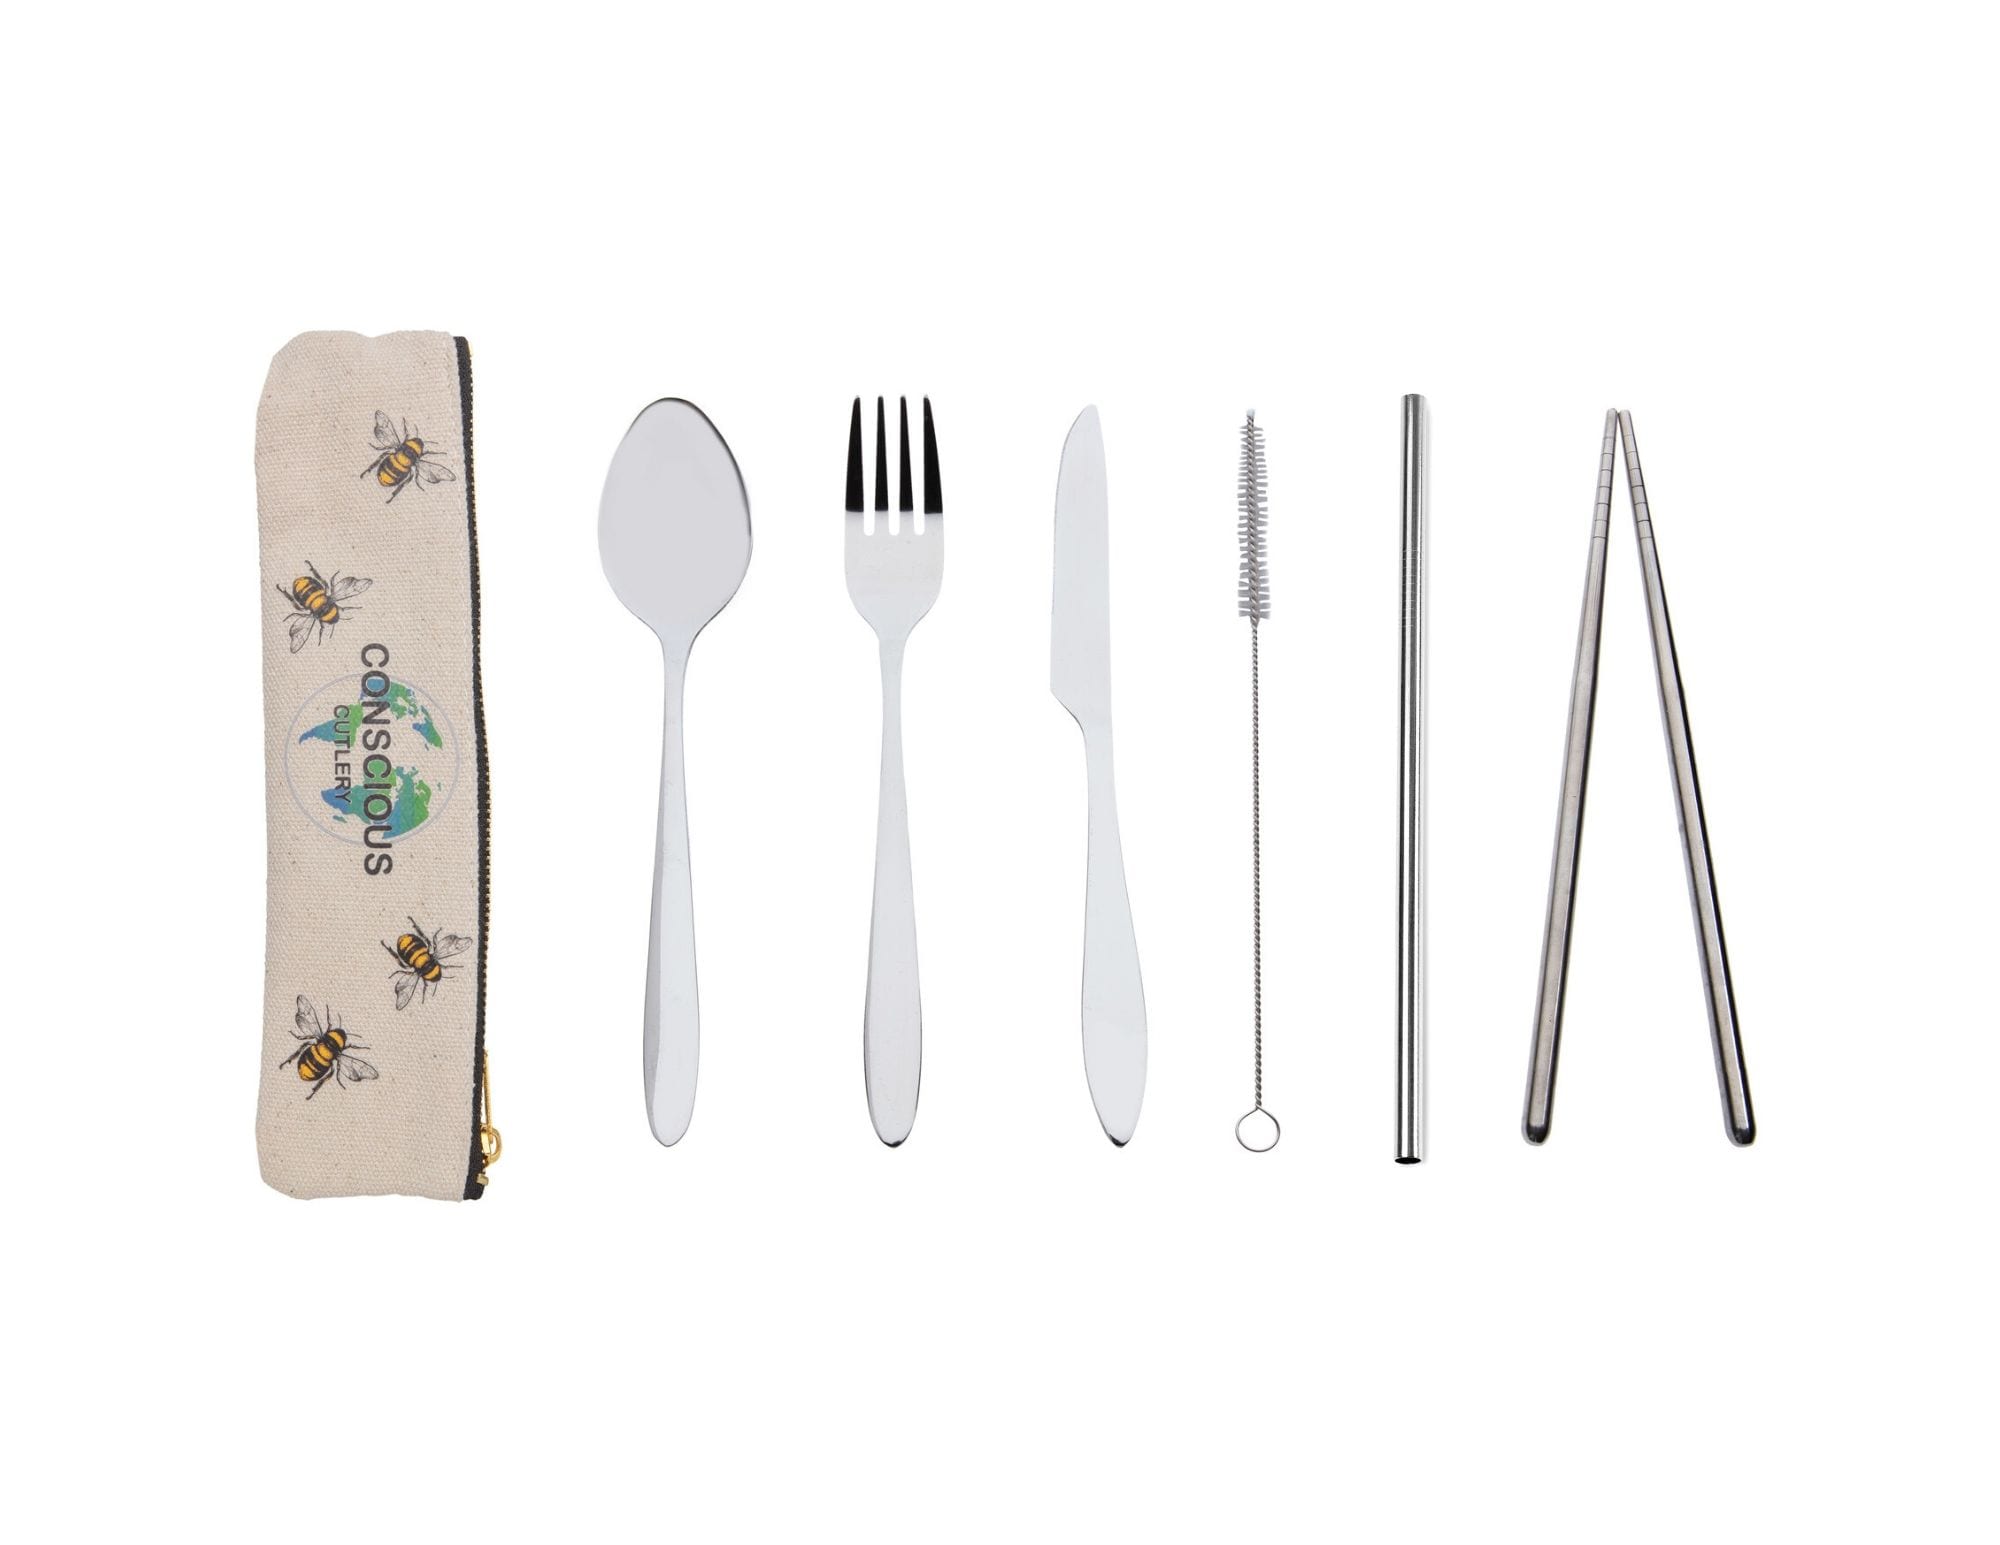 Bamboo Zero Waste Reusable Travel Cutlery Set With Pouch - Fork